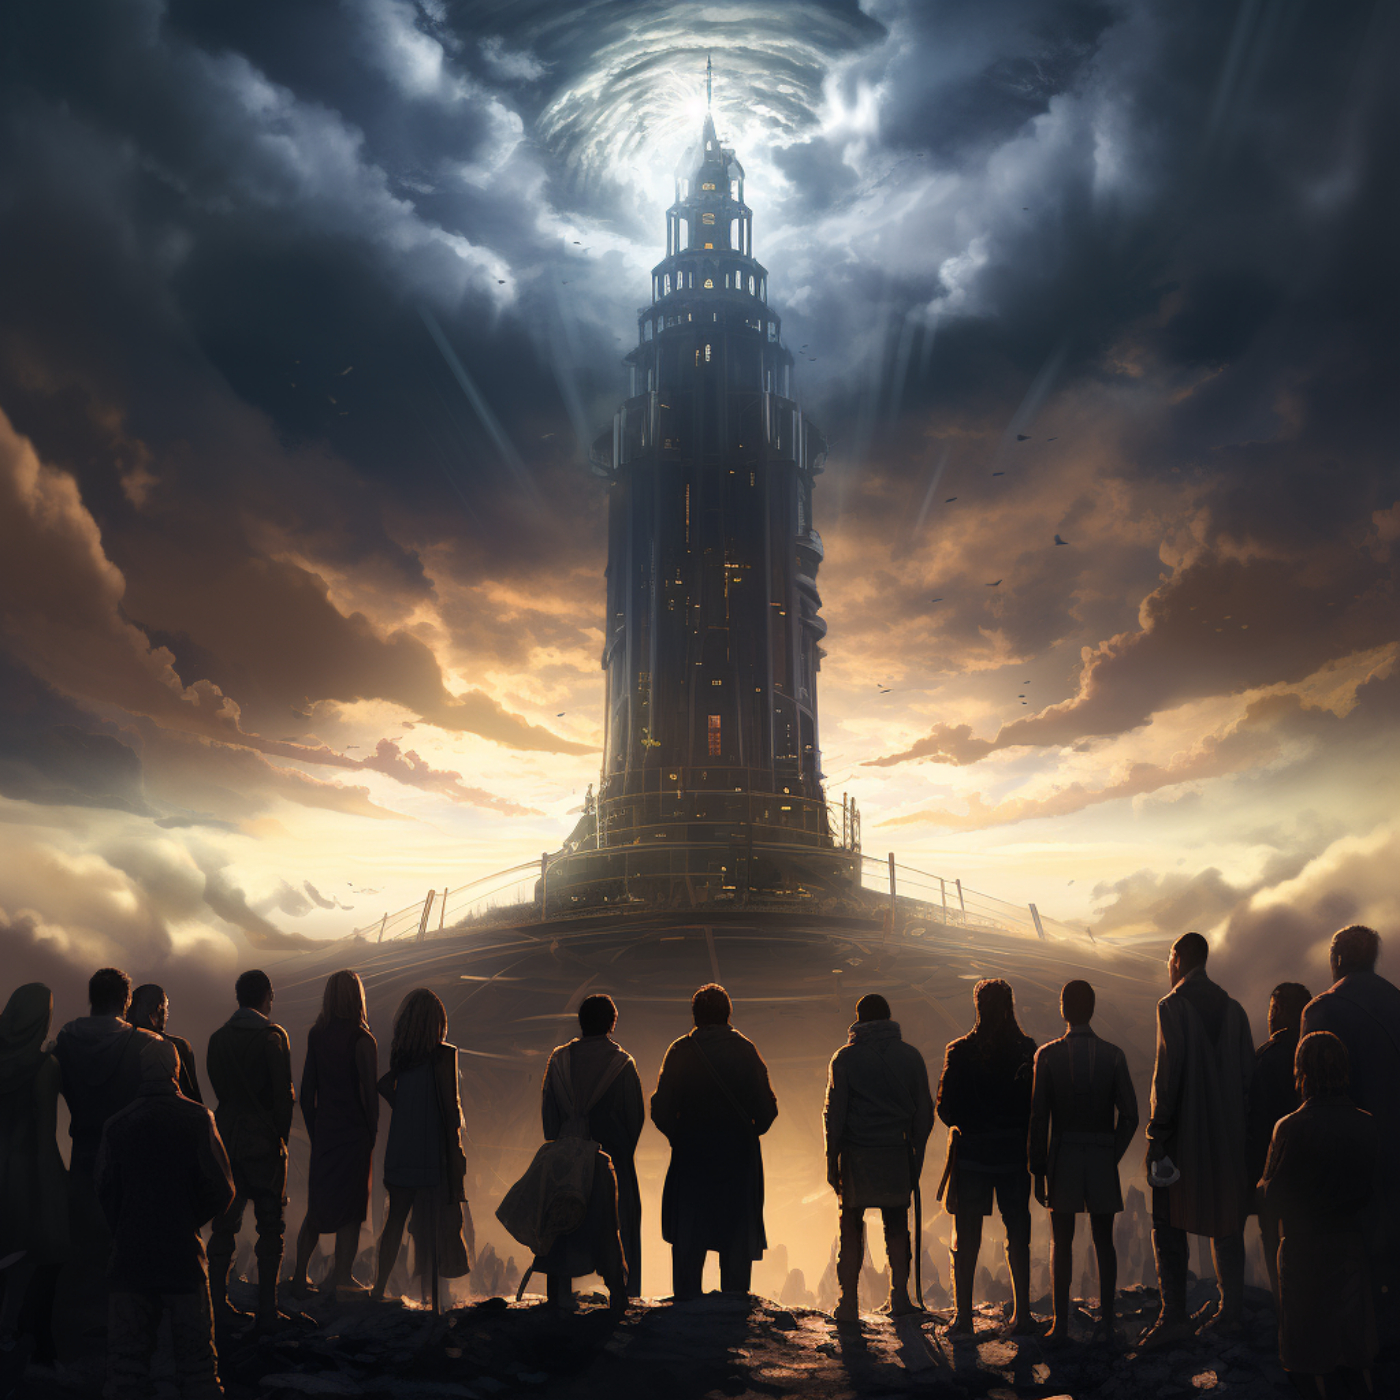 Cyberpunk community of faculty members standing in a circle on top of an ivory tower with a storm brewing